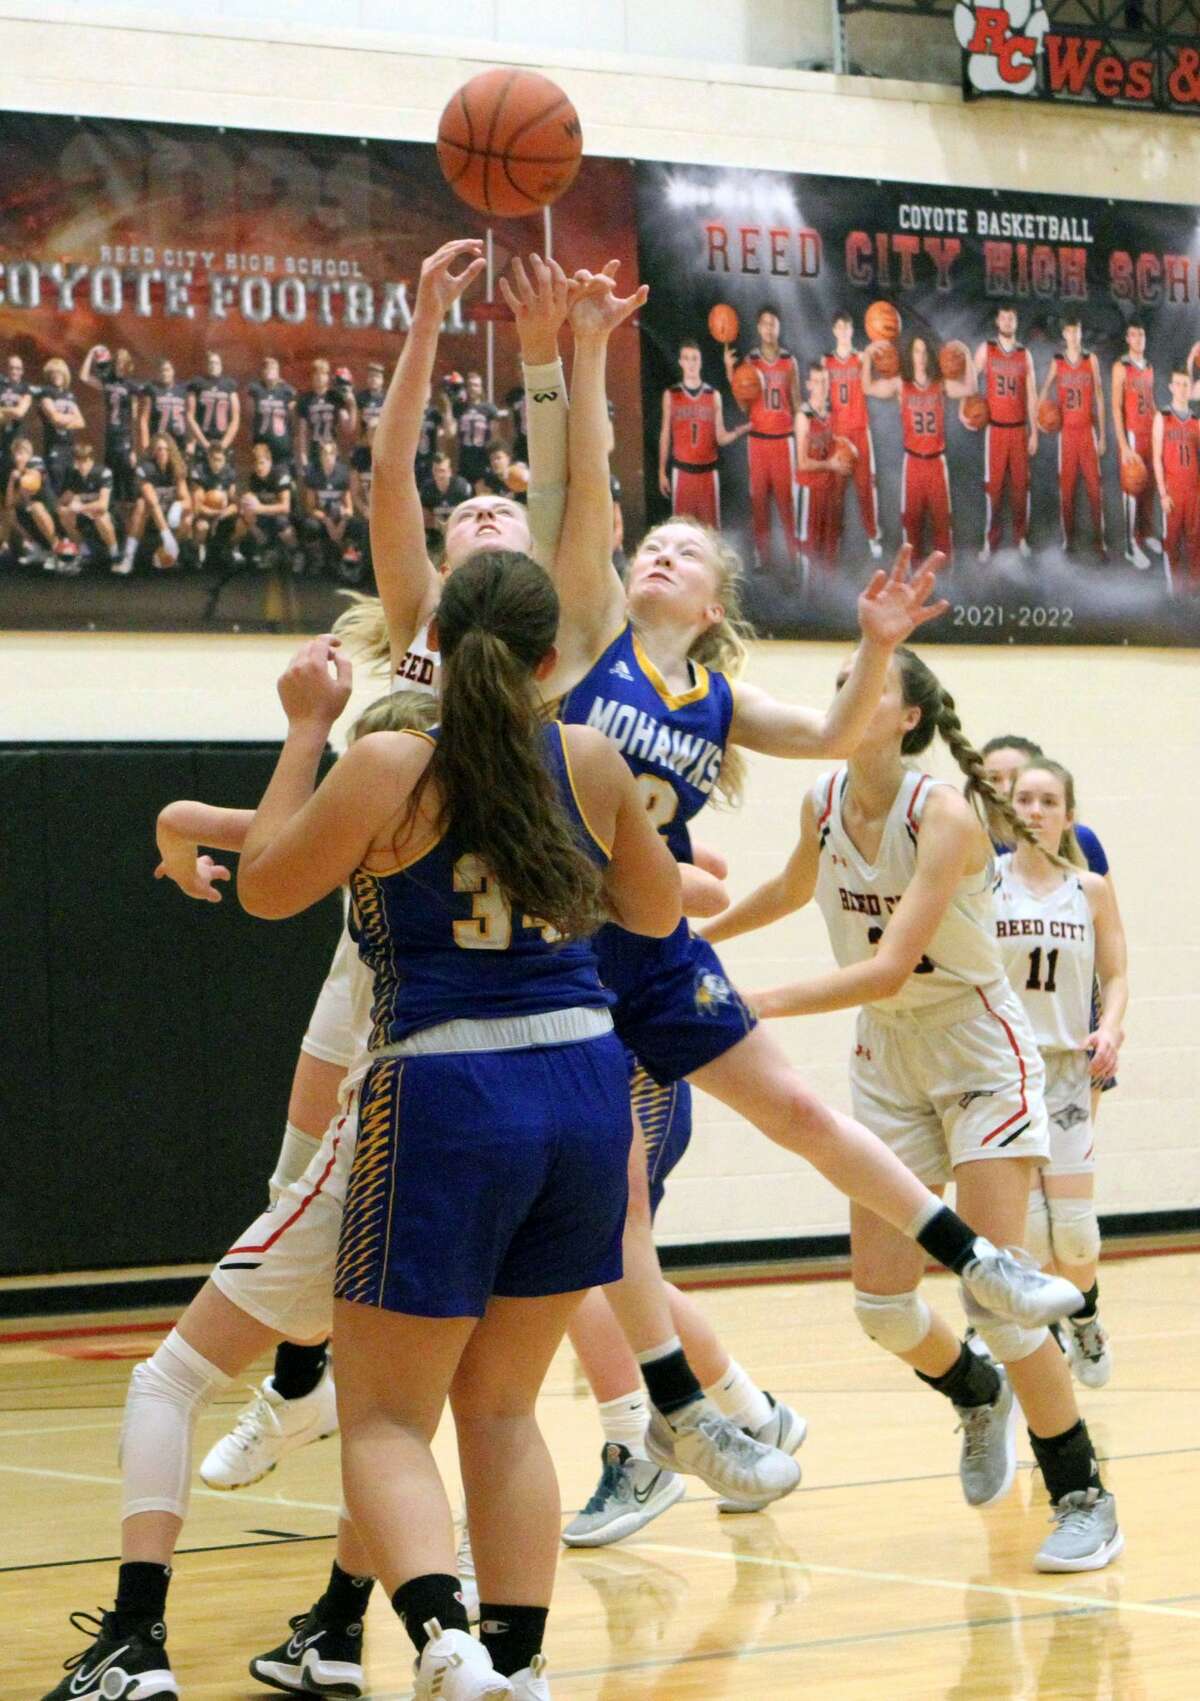 On Tuesday night, the Morley Stanwood girls basketball team defeated Reed City 43-25.